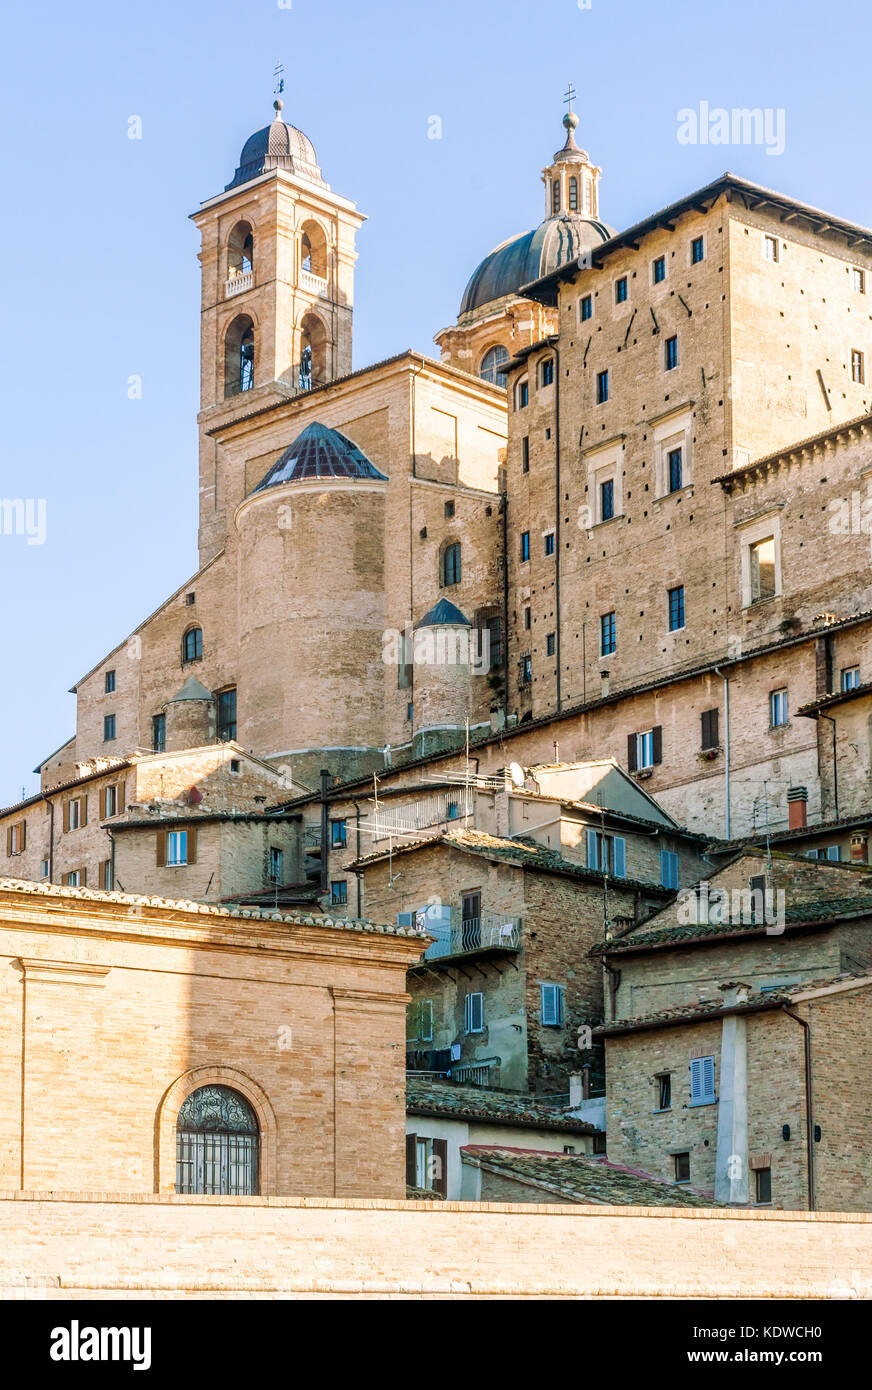 The renaissance town of Urbino, Marche, Italy. A view of the Ducale Palace (Palazzo Ducale) in Urbino city, Marche, Italy Stock Photo